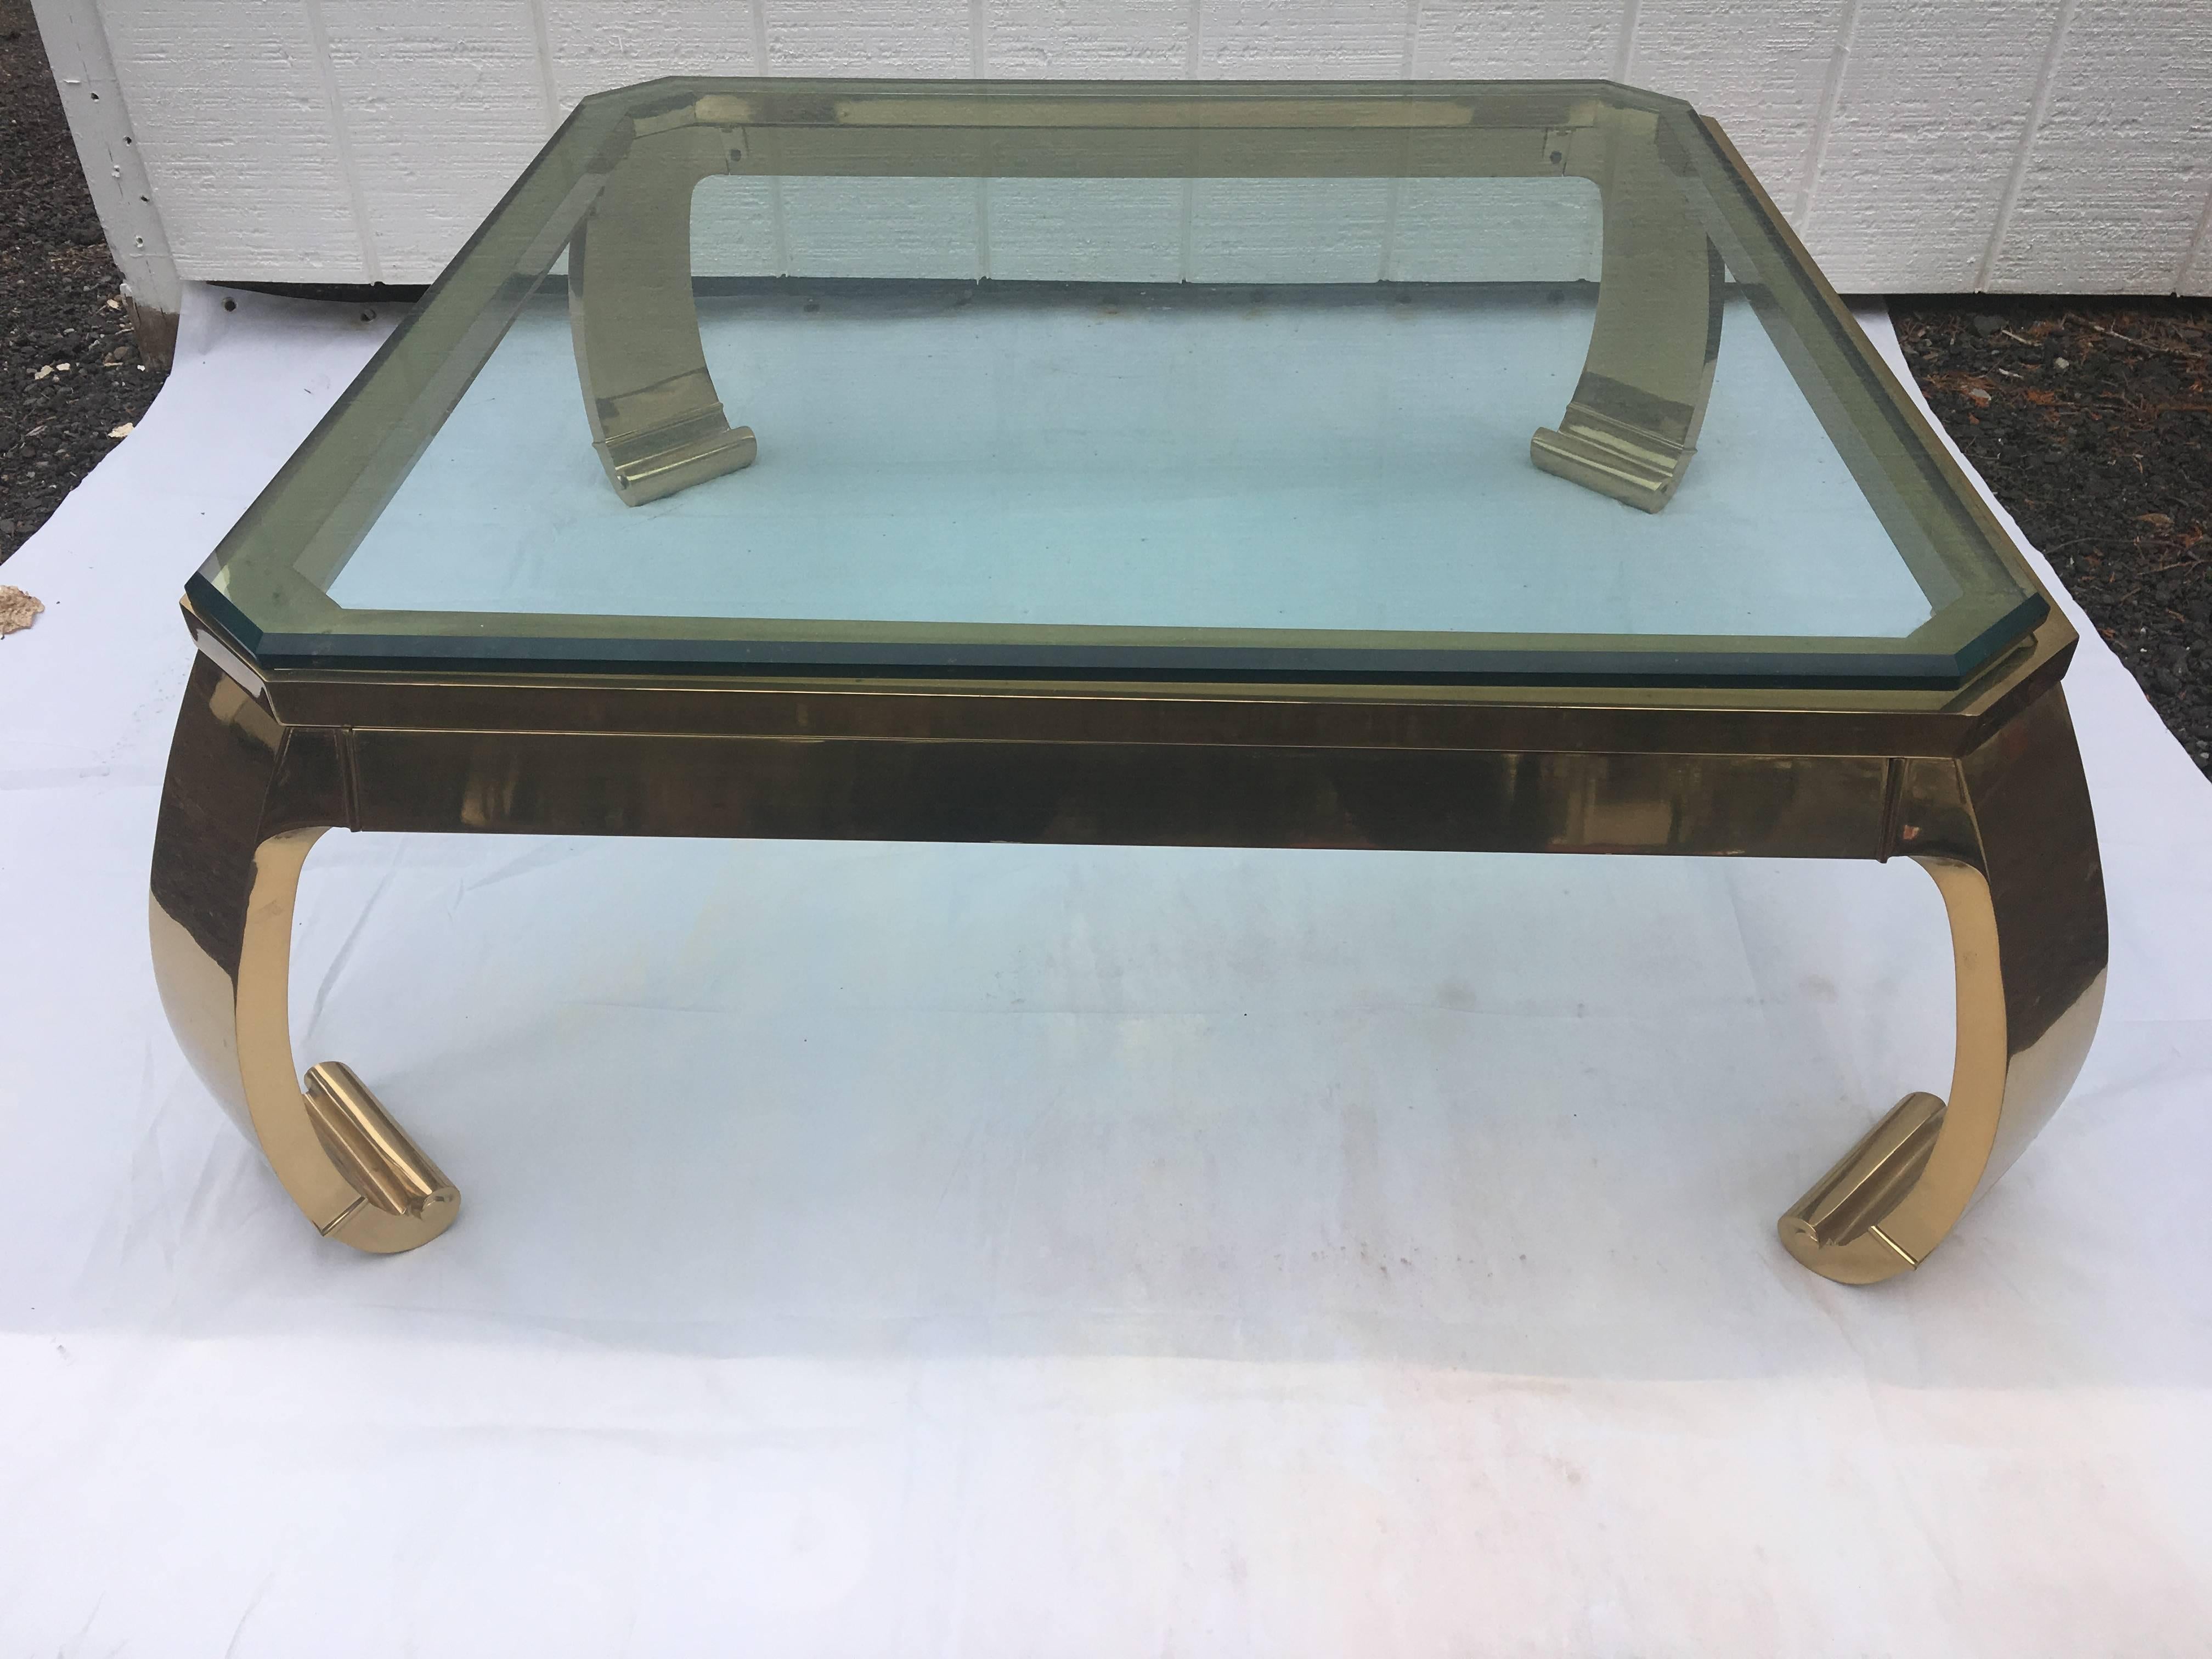 Asian inspired brass coffee table. This classic beauty is made of solid forged brass. It is the epitome of 1970s sexy chic. The 3/4 inch beveled glass top sits on top of the base, unattached. The thick curved Ming style legs on this piece are